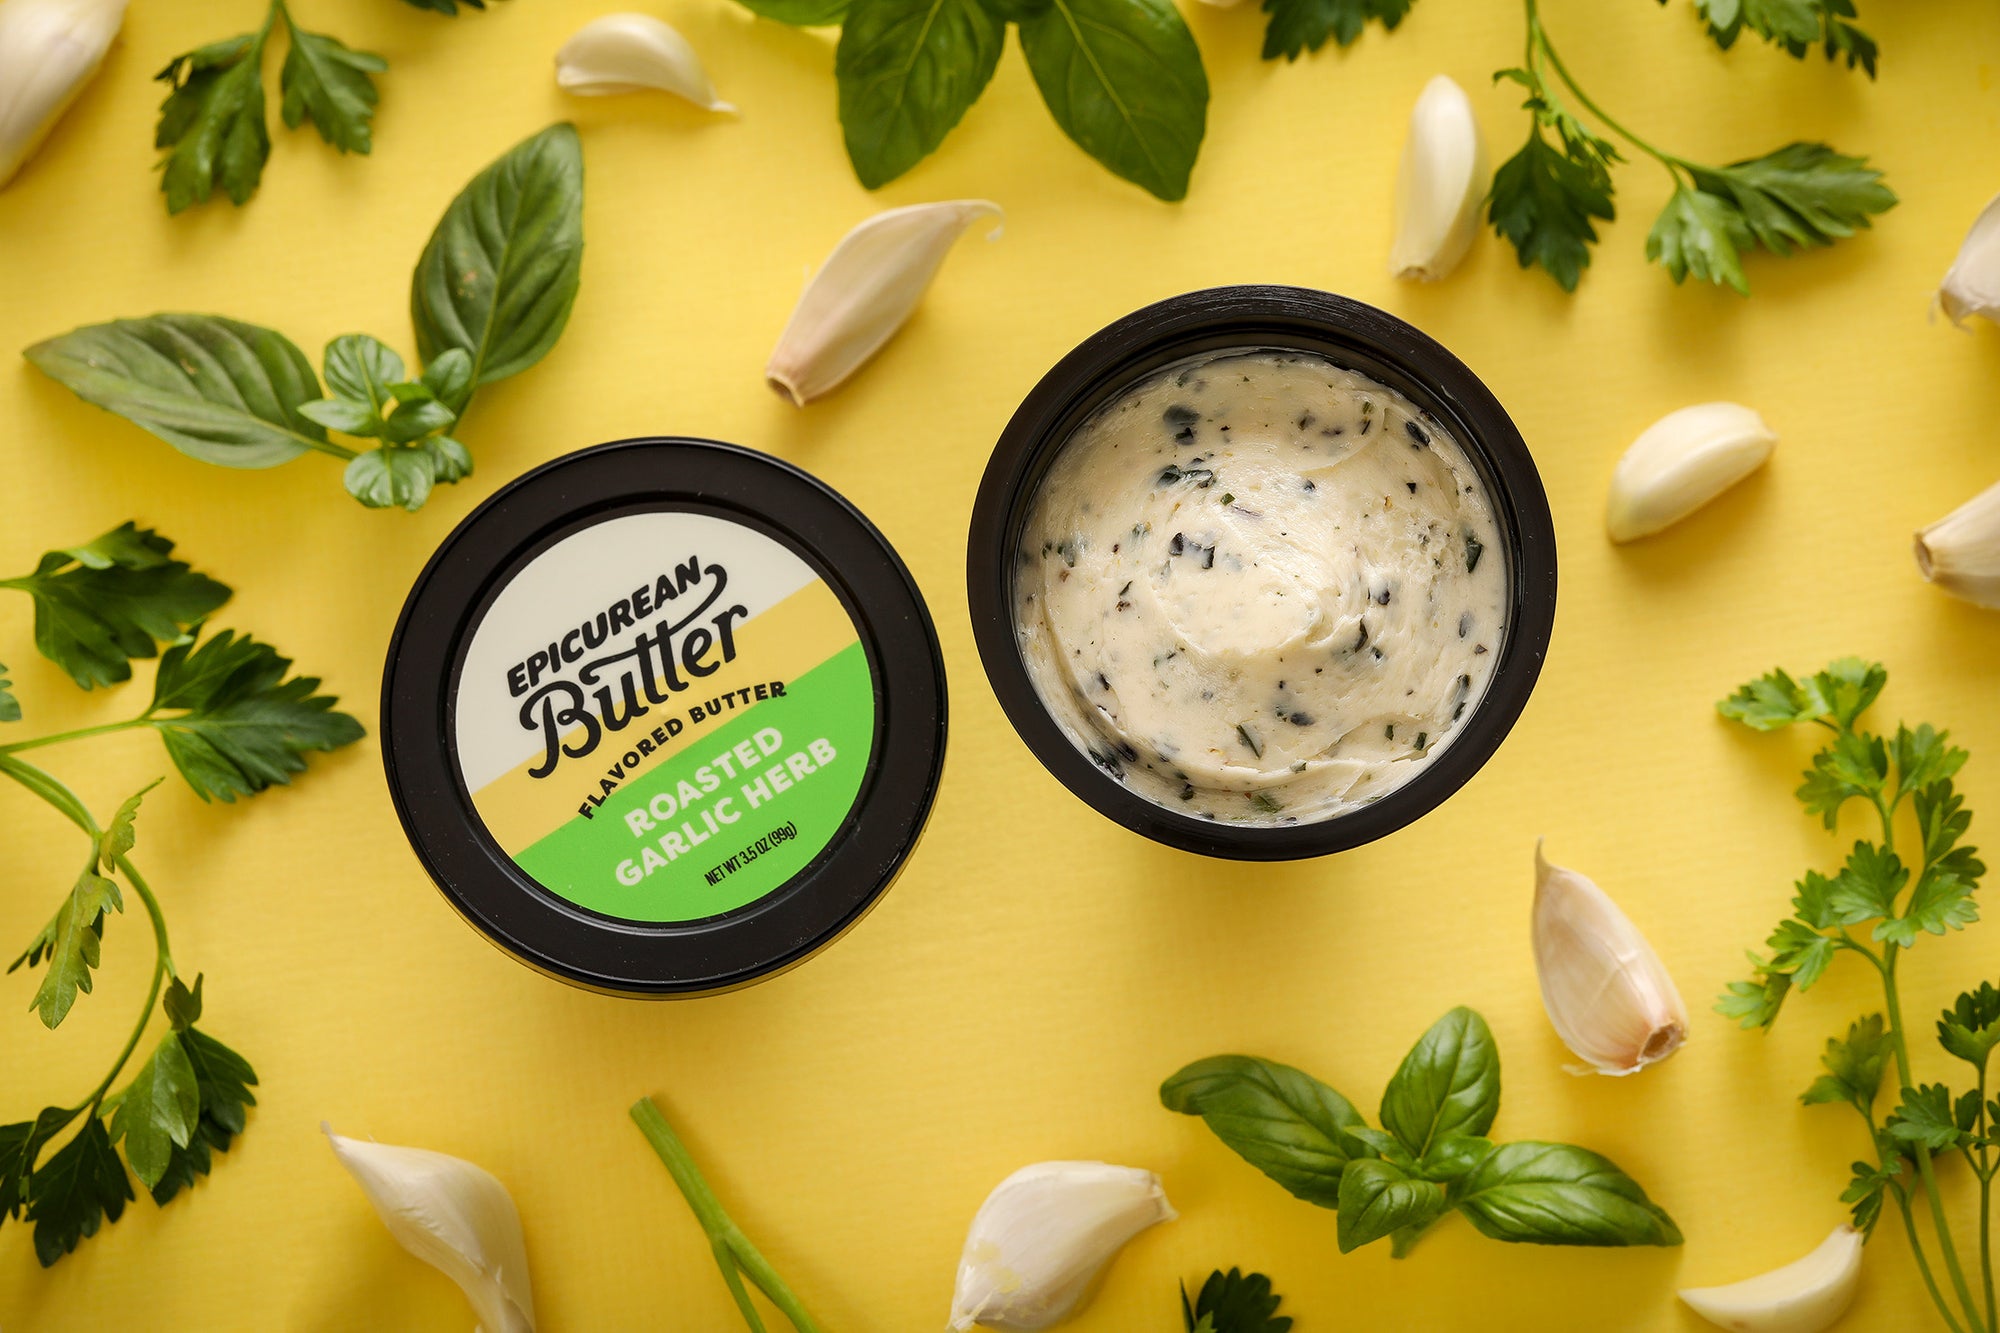 Epicurean Butter Roasted Garlic Herb Flavored Butter with ingredients